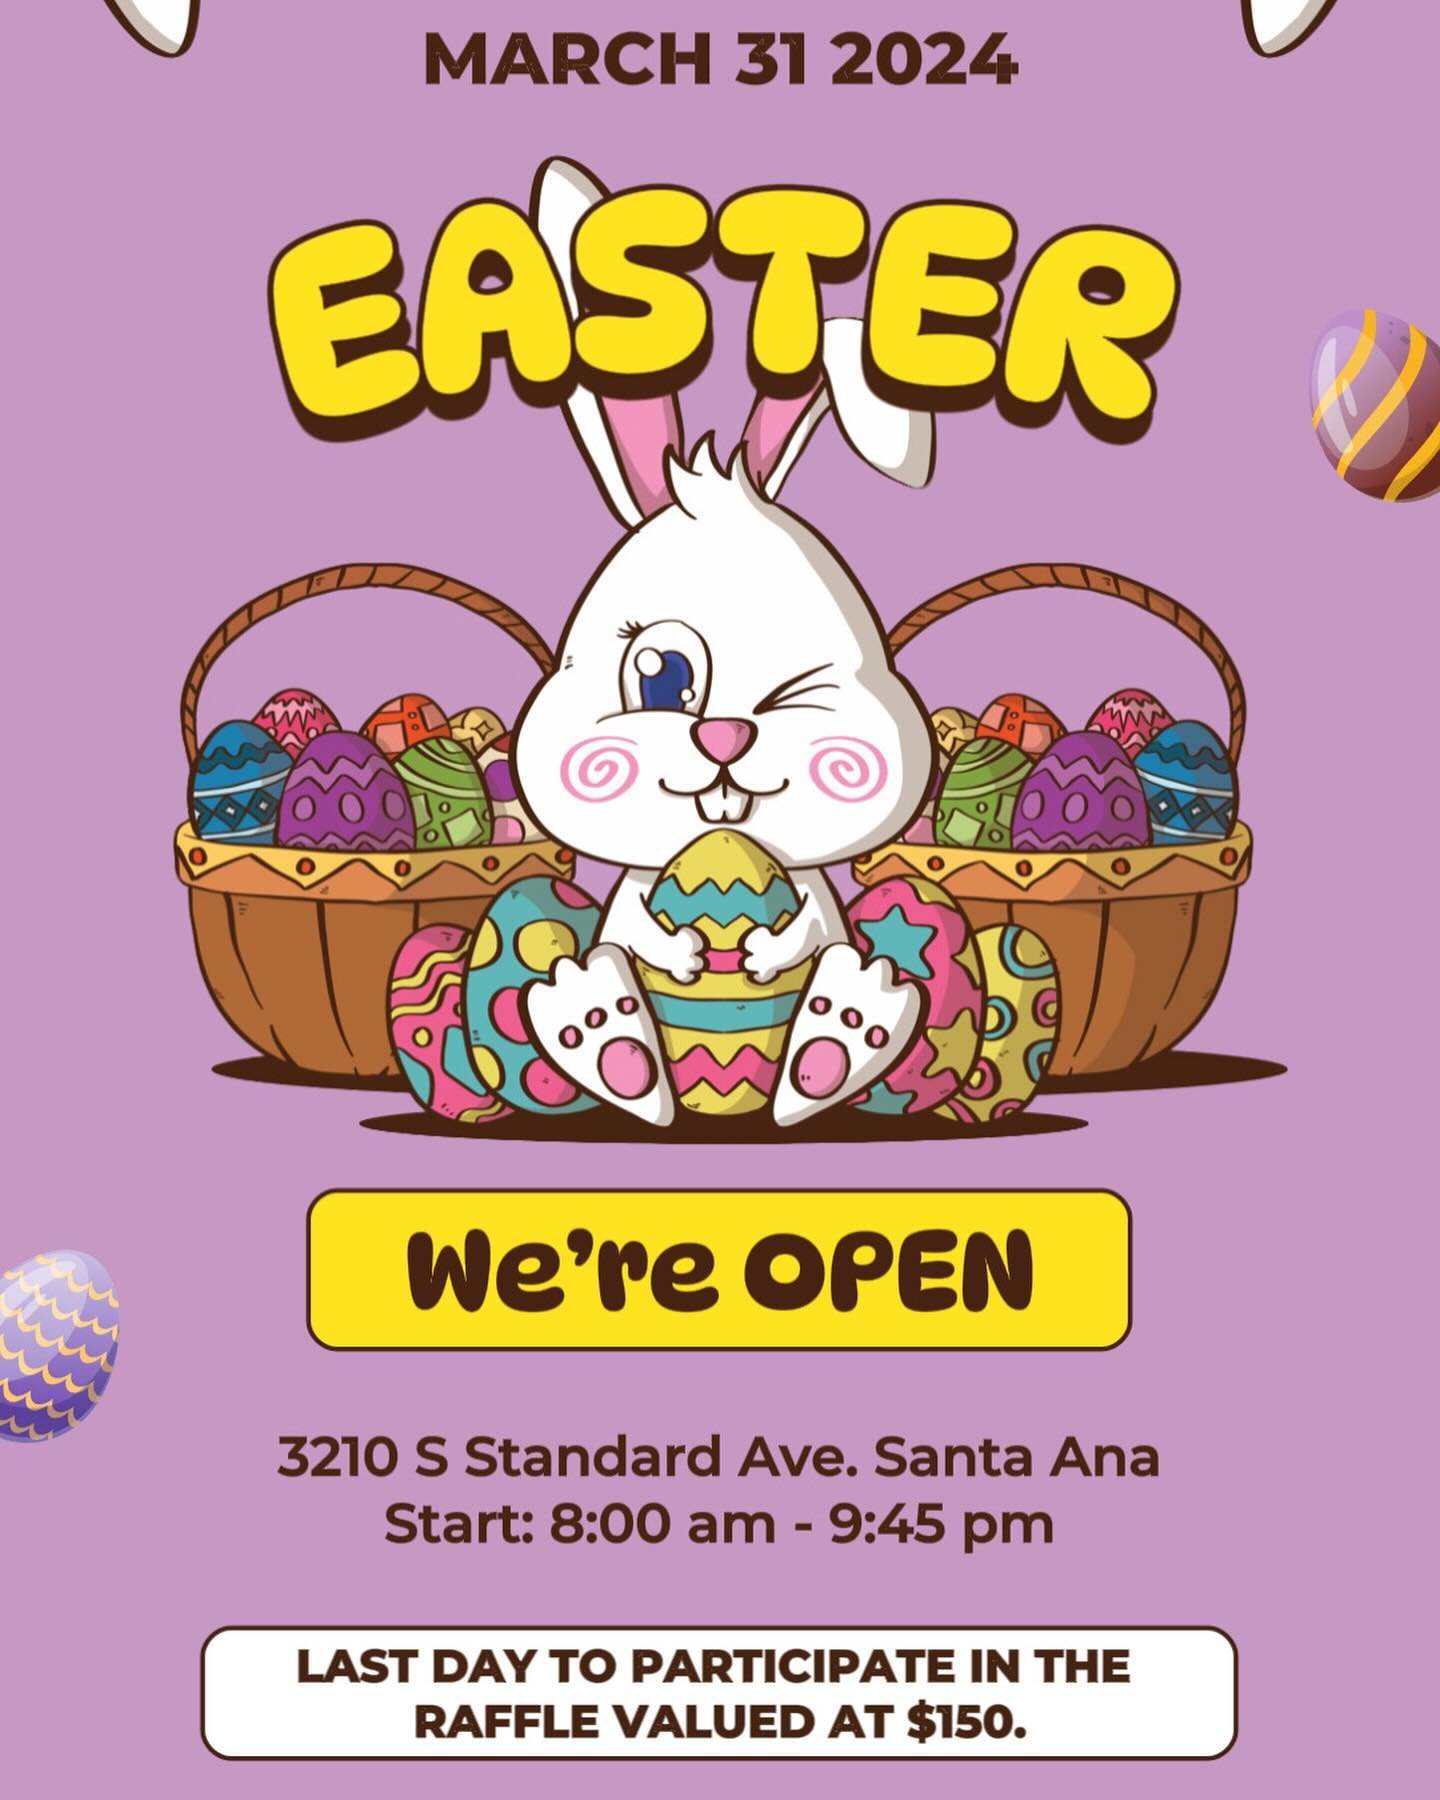 No bunny does Easter like we do! 🐰 We&rsquo;re open this Easter with regular hours and a special treat! 🥳 Spend $80+ and you&rsquo;re in with the chance to win an exclusive Easter Basket! 🐣 What are you waiting for? #ShopToWin #EasterHolidays #Ope